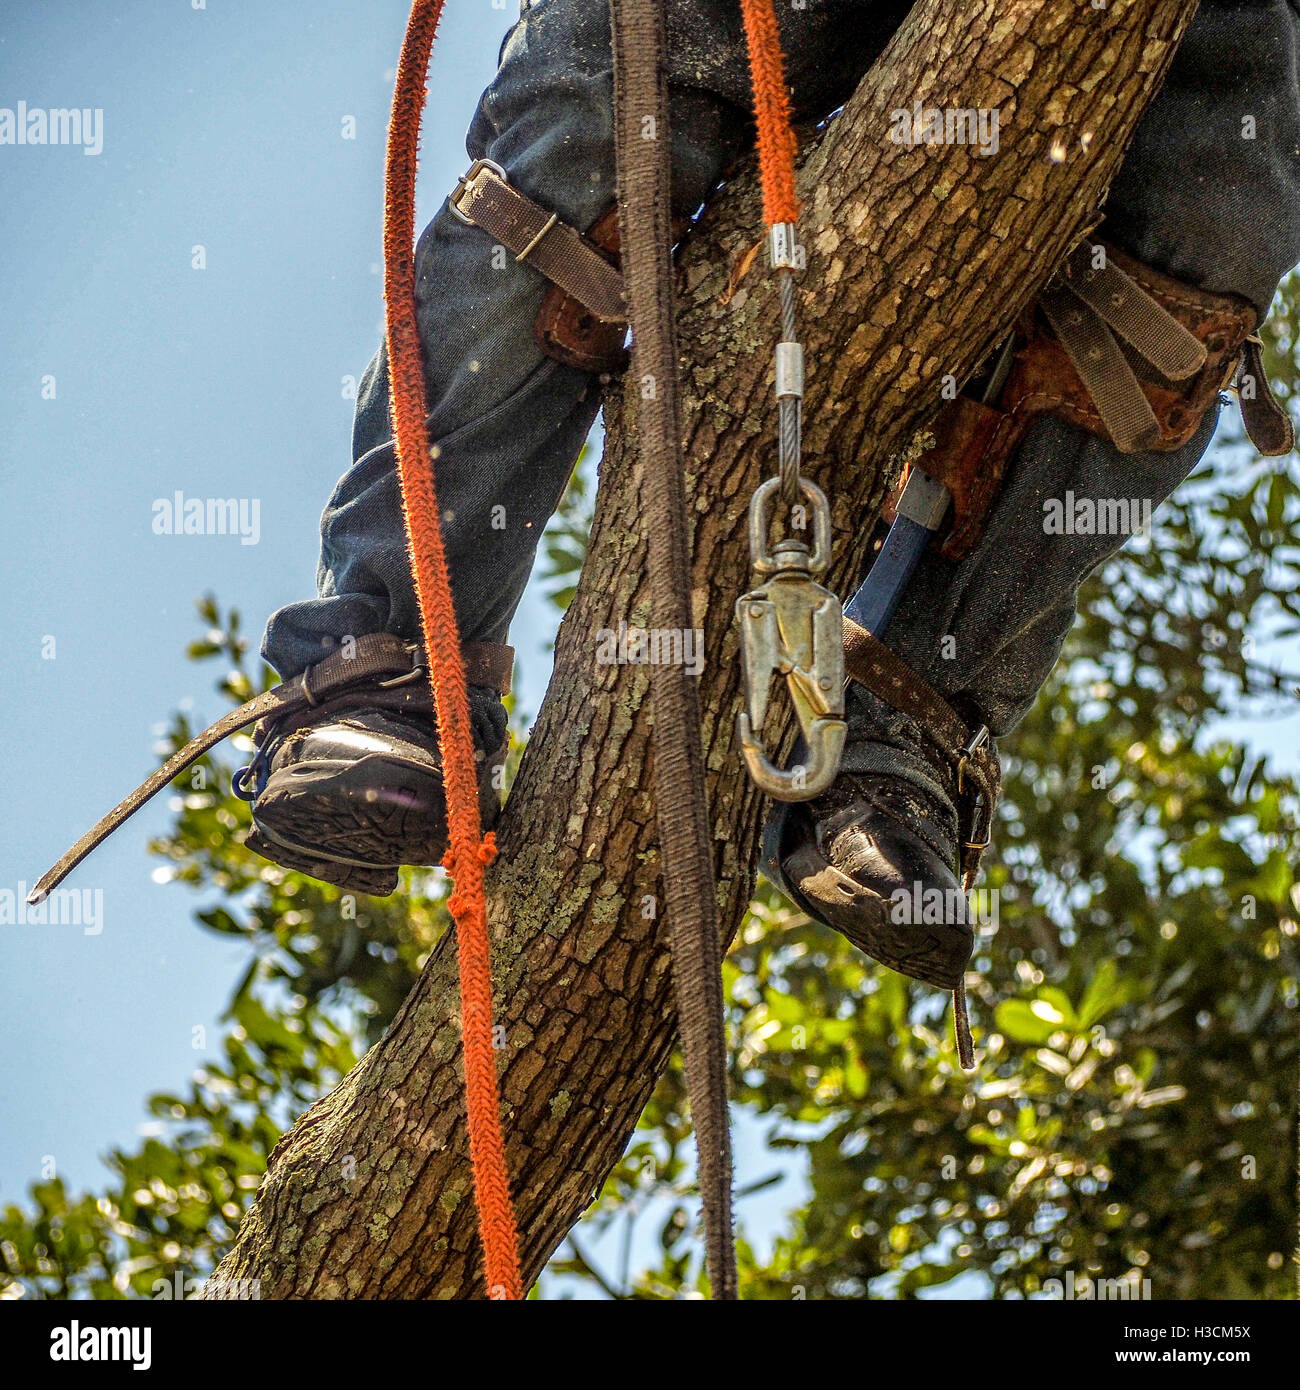 Legs of Worker Climb a Tree with Ropes Stock Photo